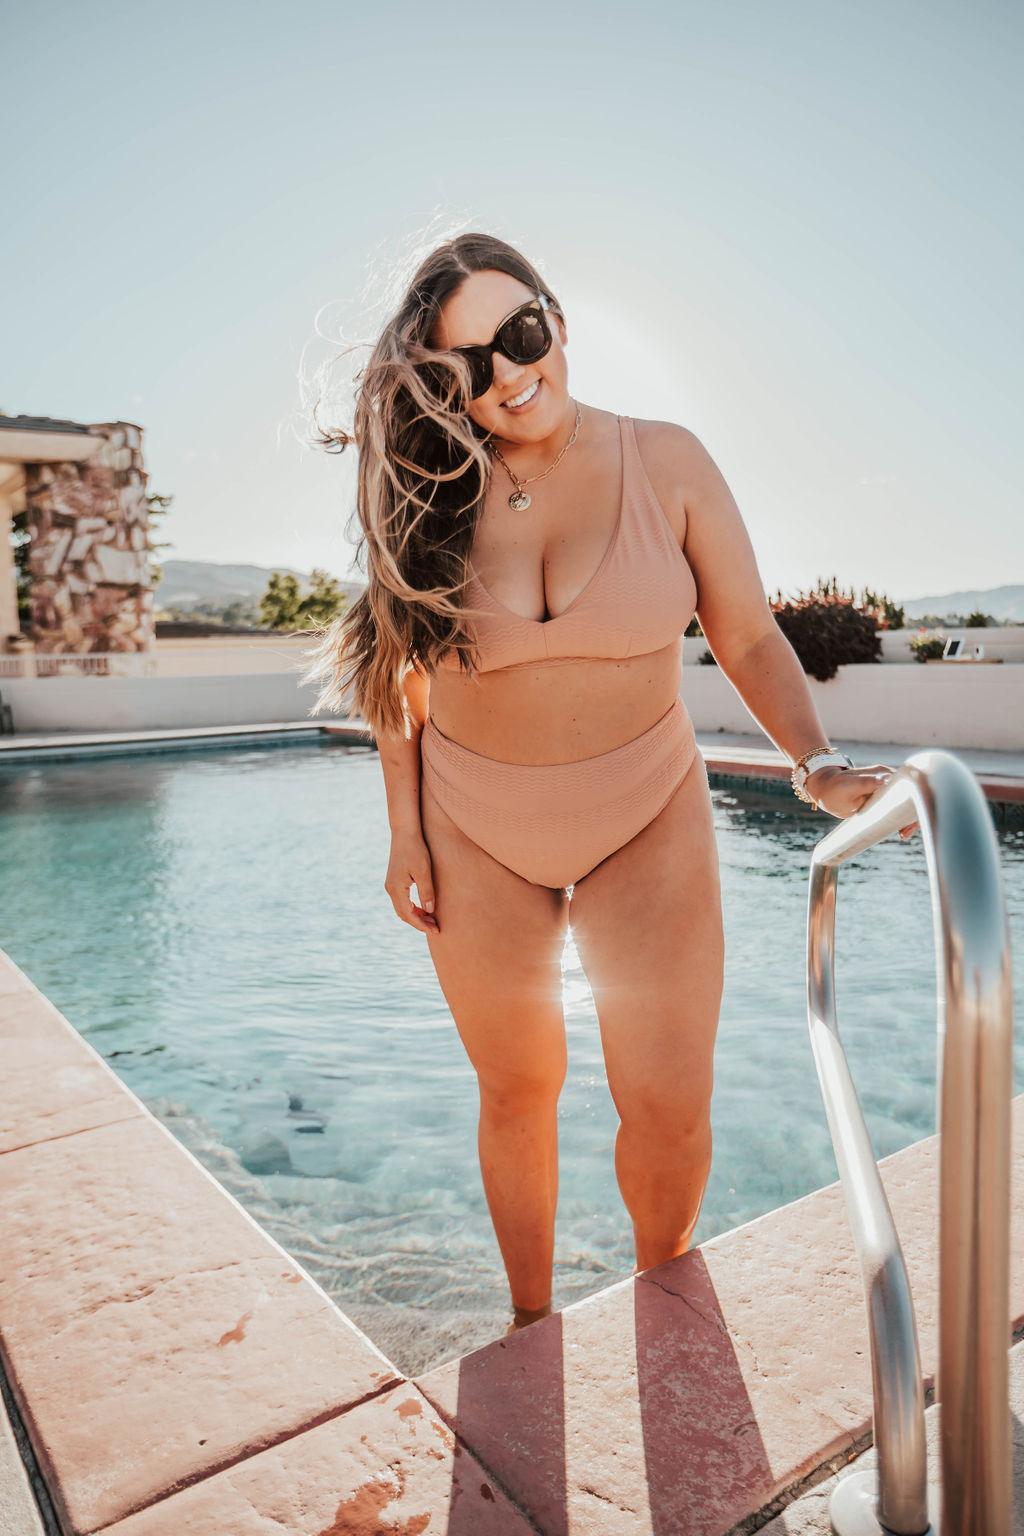 Reno blogger, Ashley Zeal from Two Peas in a Prada shares the best curvy girl swimsuits 2020. She is sharing the most flattering one and two-piece suits for any body type!